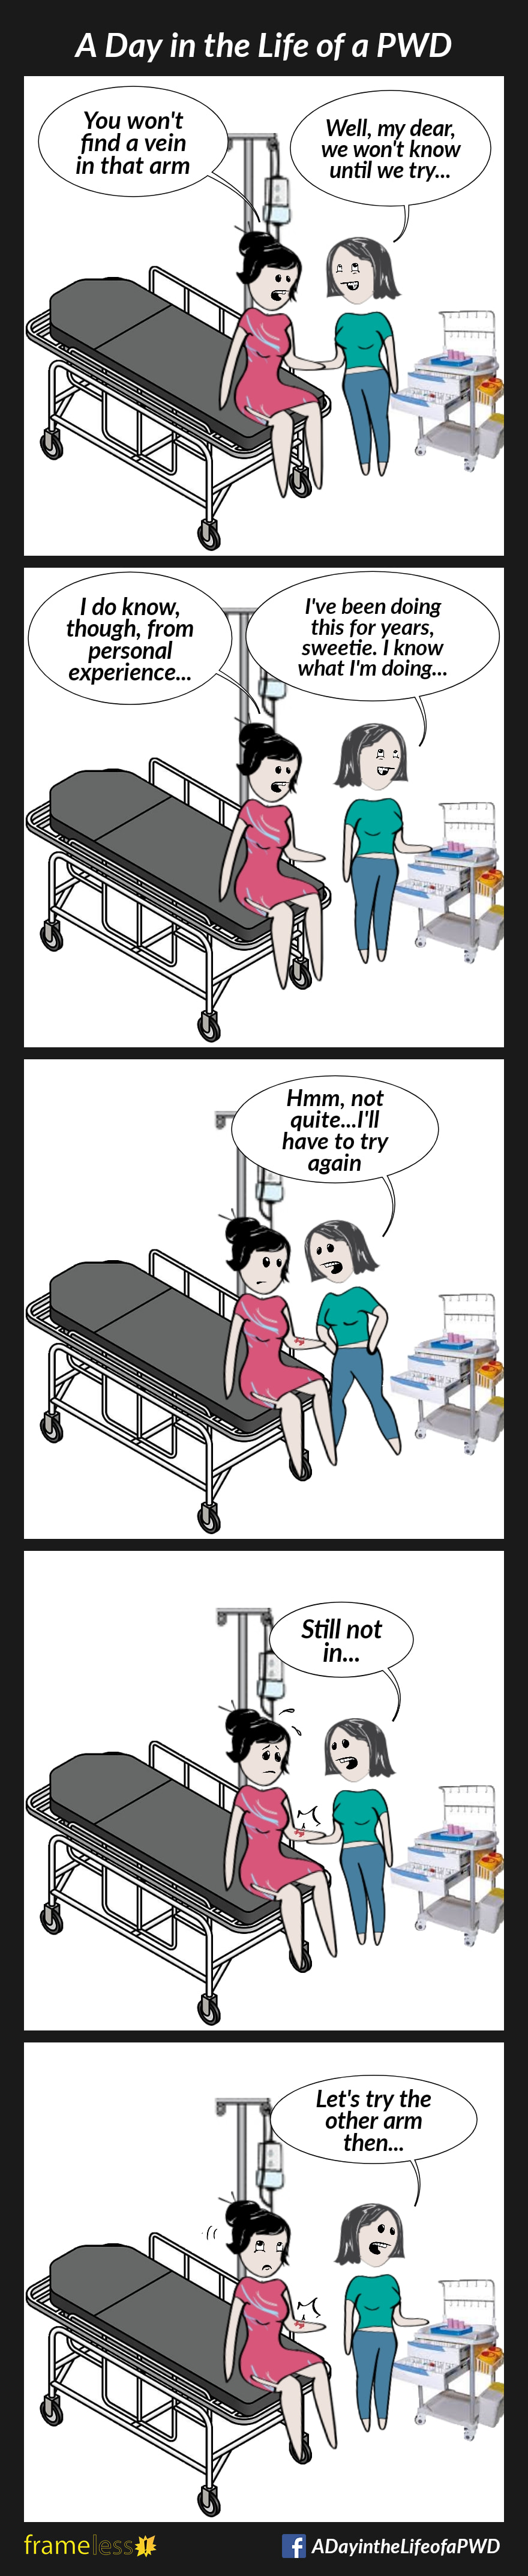 COMIC STRIP 
A Day in the Life of a PWD (Person With a Disability) 

Frame 1:
A woman is sitting on a hospital gurney. A nurse, preparing to insert an IV, is inspecting her left arm.
WOMAN: You won't find a vein in that arm.
NURSE: Well, my dear, we won't know until we try...

Frame 2:
WOMAN: I do know, though, from personal experience...
NURSE: I've been doingcthis for years, sweetie. I know what I'm doing...

Frame 3:
The nurse fails her first attempt.
NURSE: Hmm, not quite...I'll have to try again.

Frame 4:
The nurse fails her second attempt. 
NURSE: Still not in...
The woman's arm hurts now.

Frame 5:
NURSE: Let's try the other arm then...
The woman rolls her eyes.